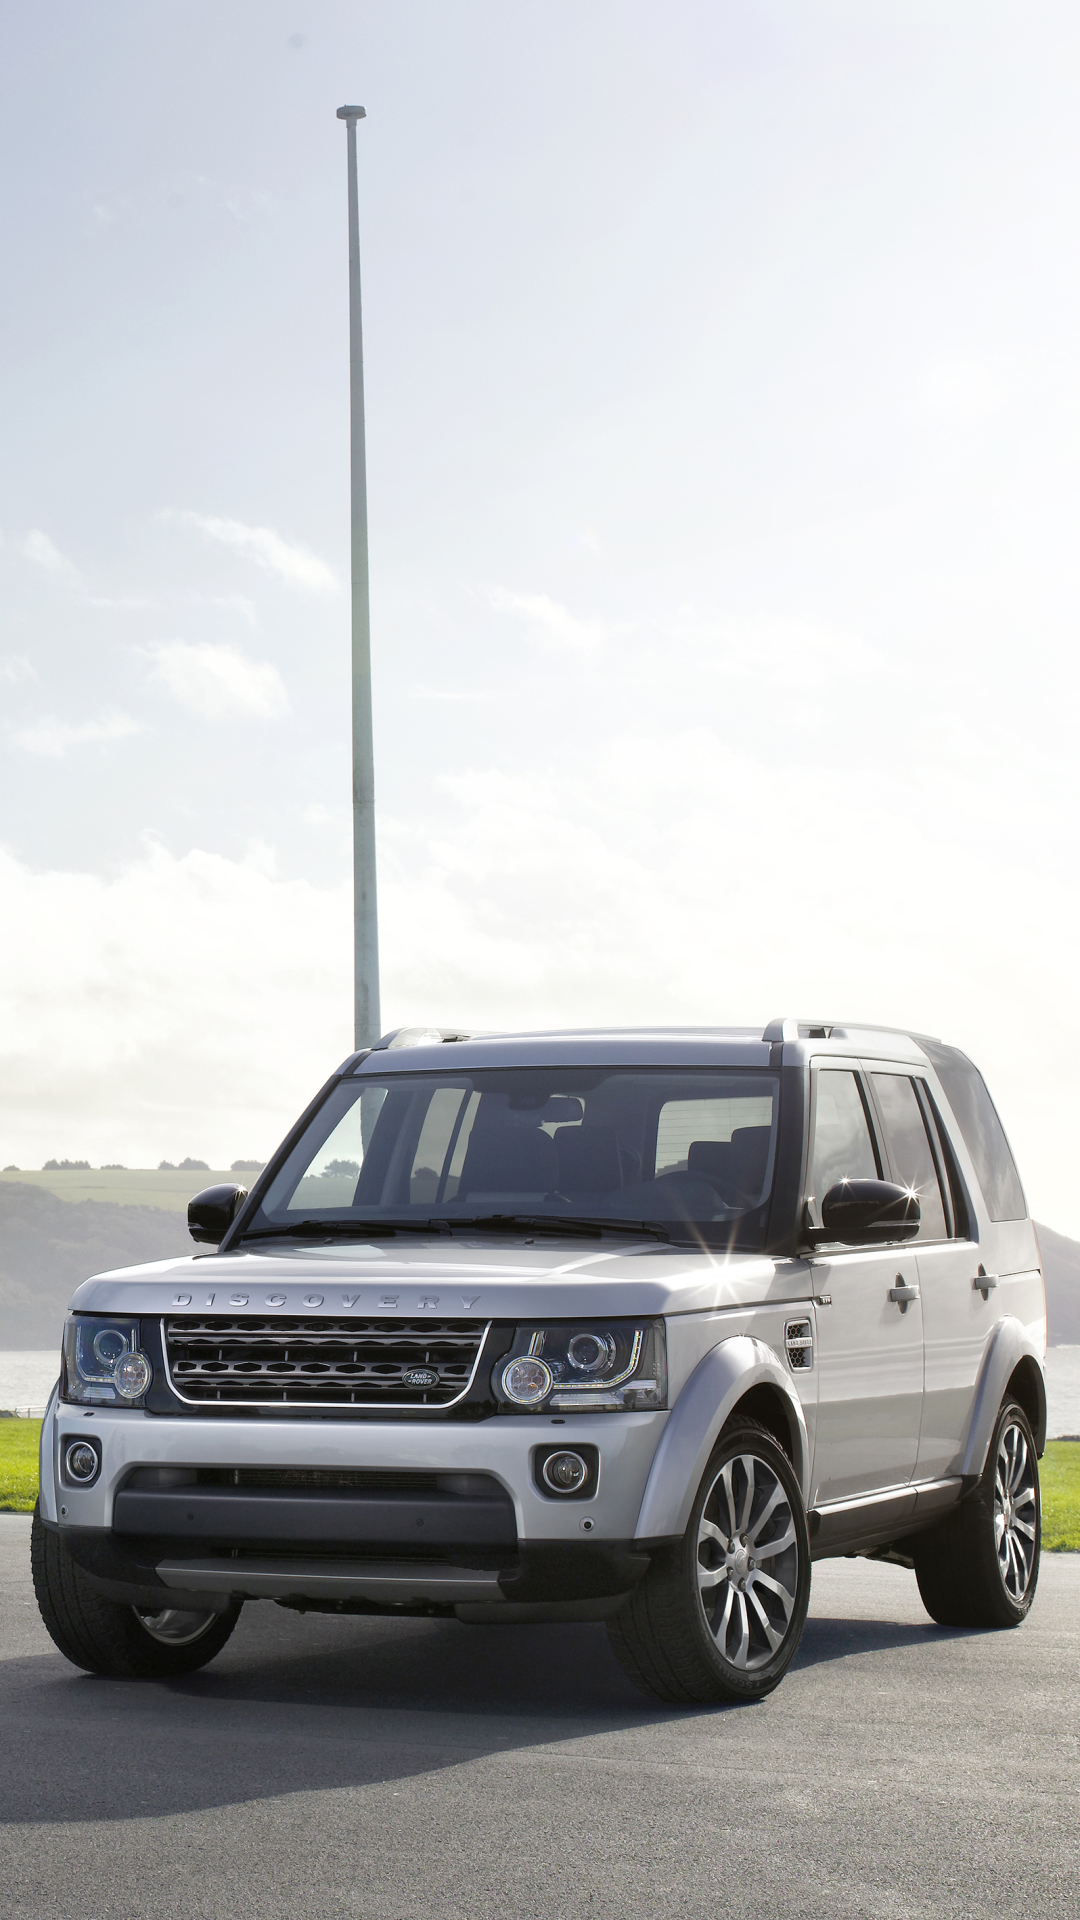 land rover discovery, land rover, vehicles iphone wallpaper